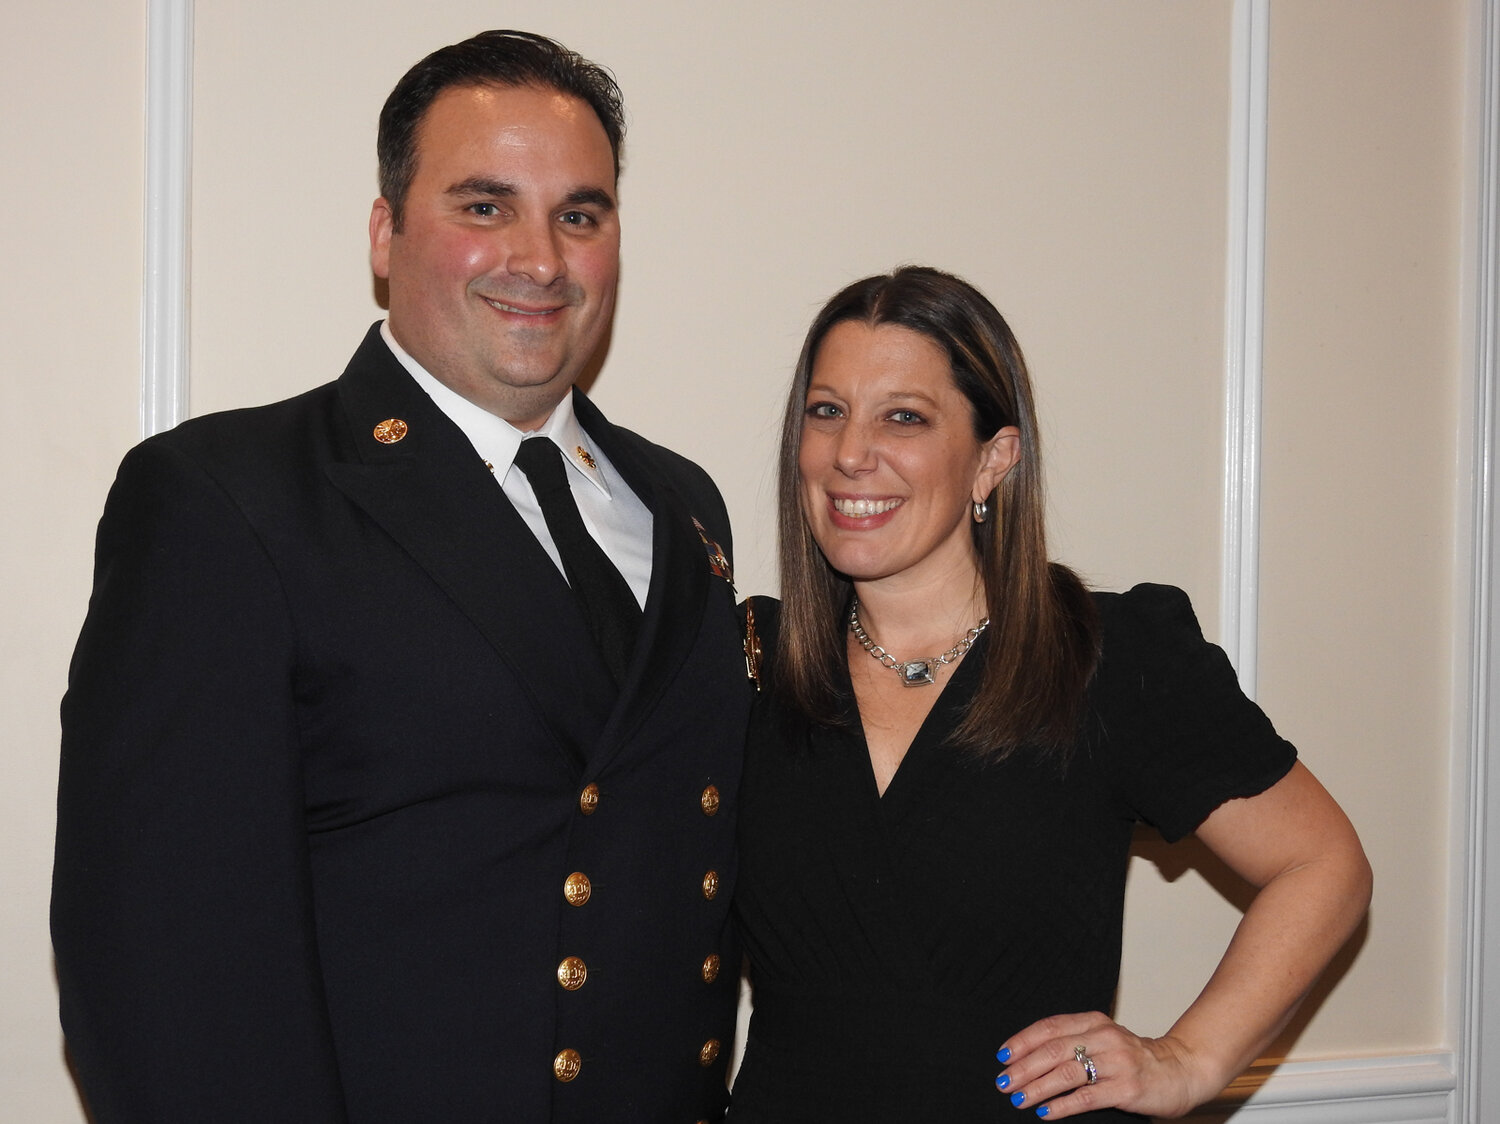 Honoree Ex-Chief Chris Kelly of the Lynbrook Fire Department with his wife, Allison.